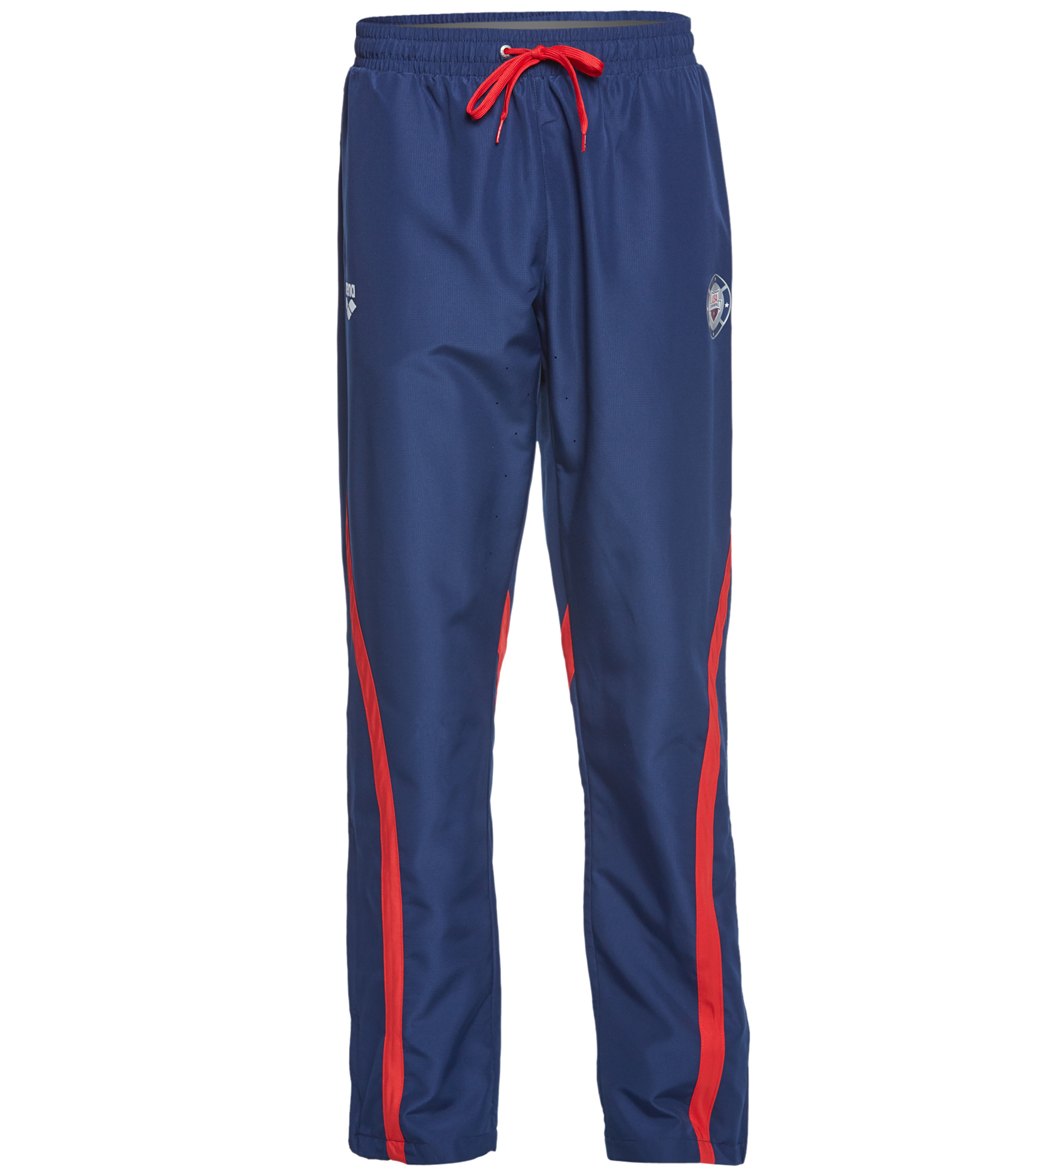 Arena National Team Unisex Warm Up Pant at SwimOutlet.com - Free Shipping